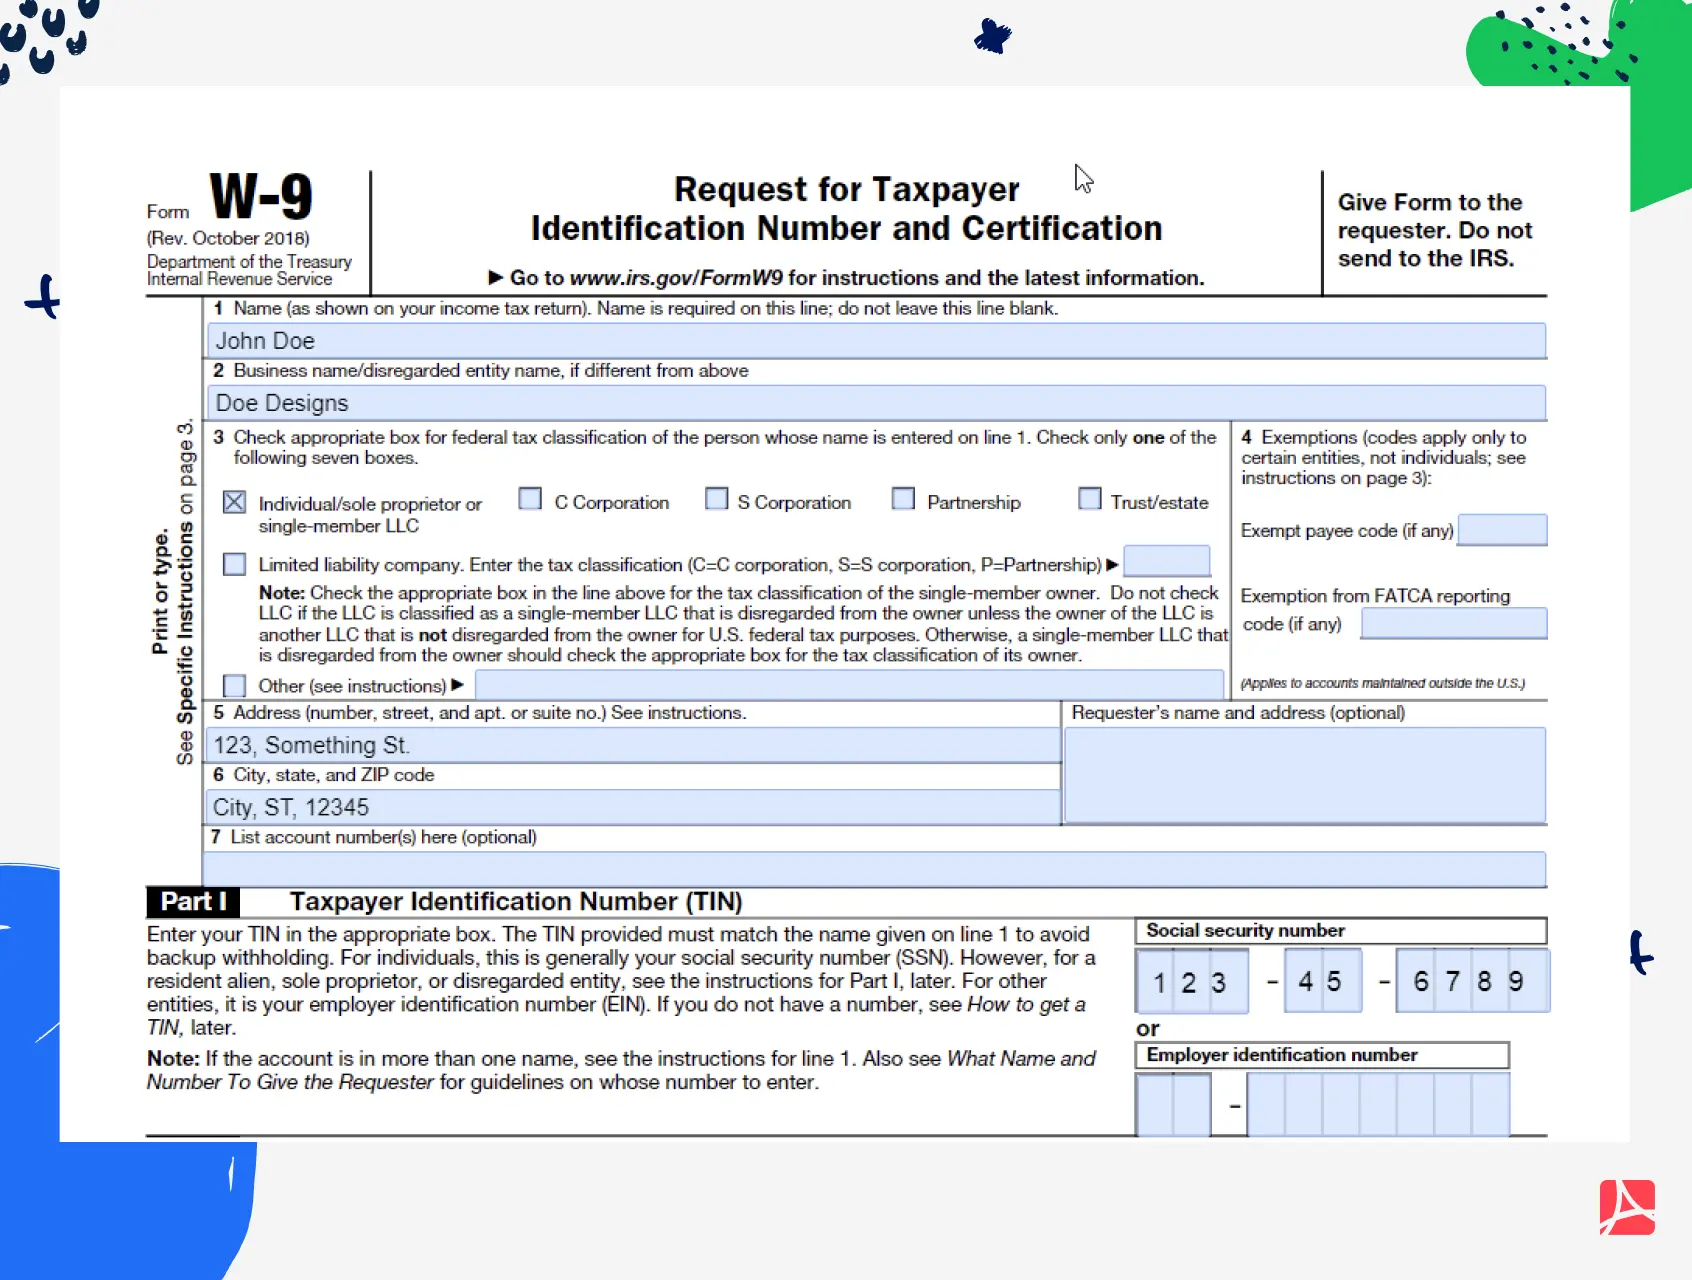 W-9 form example